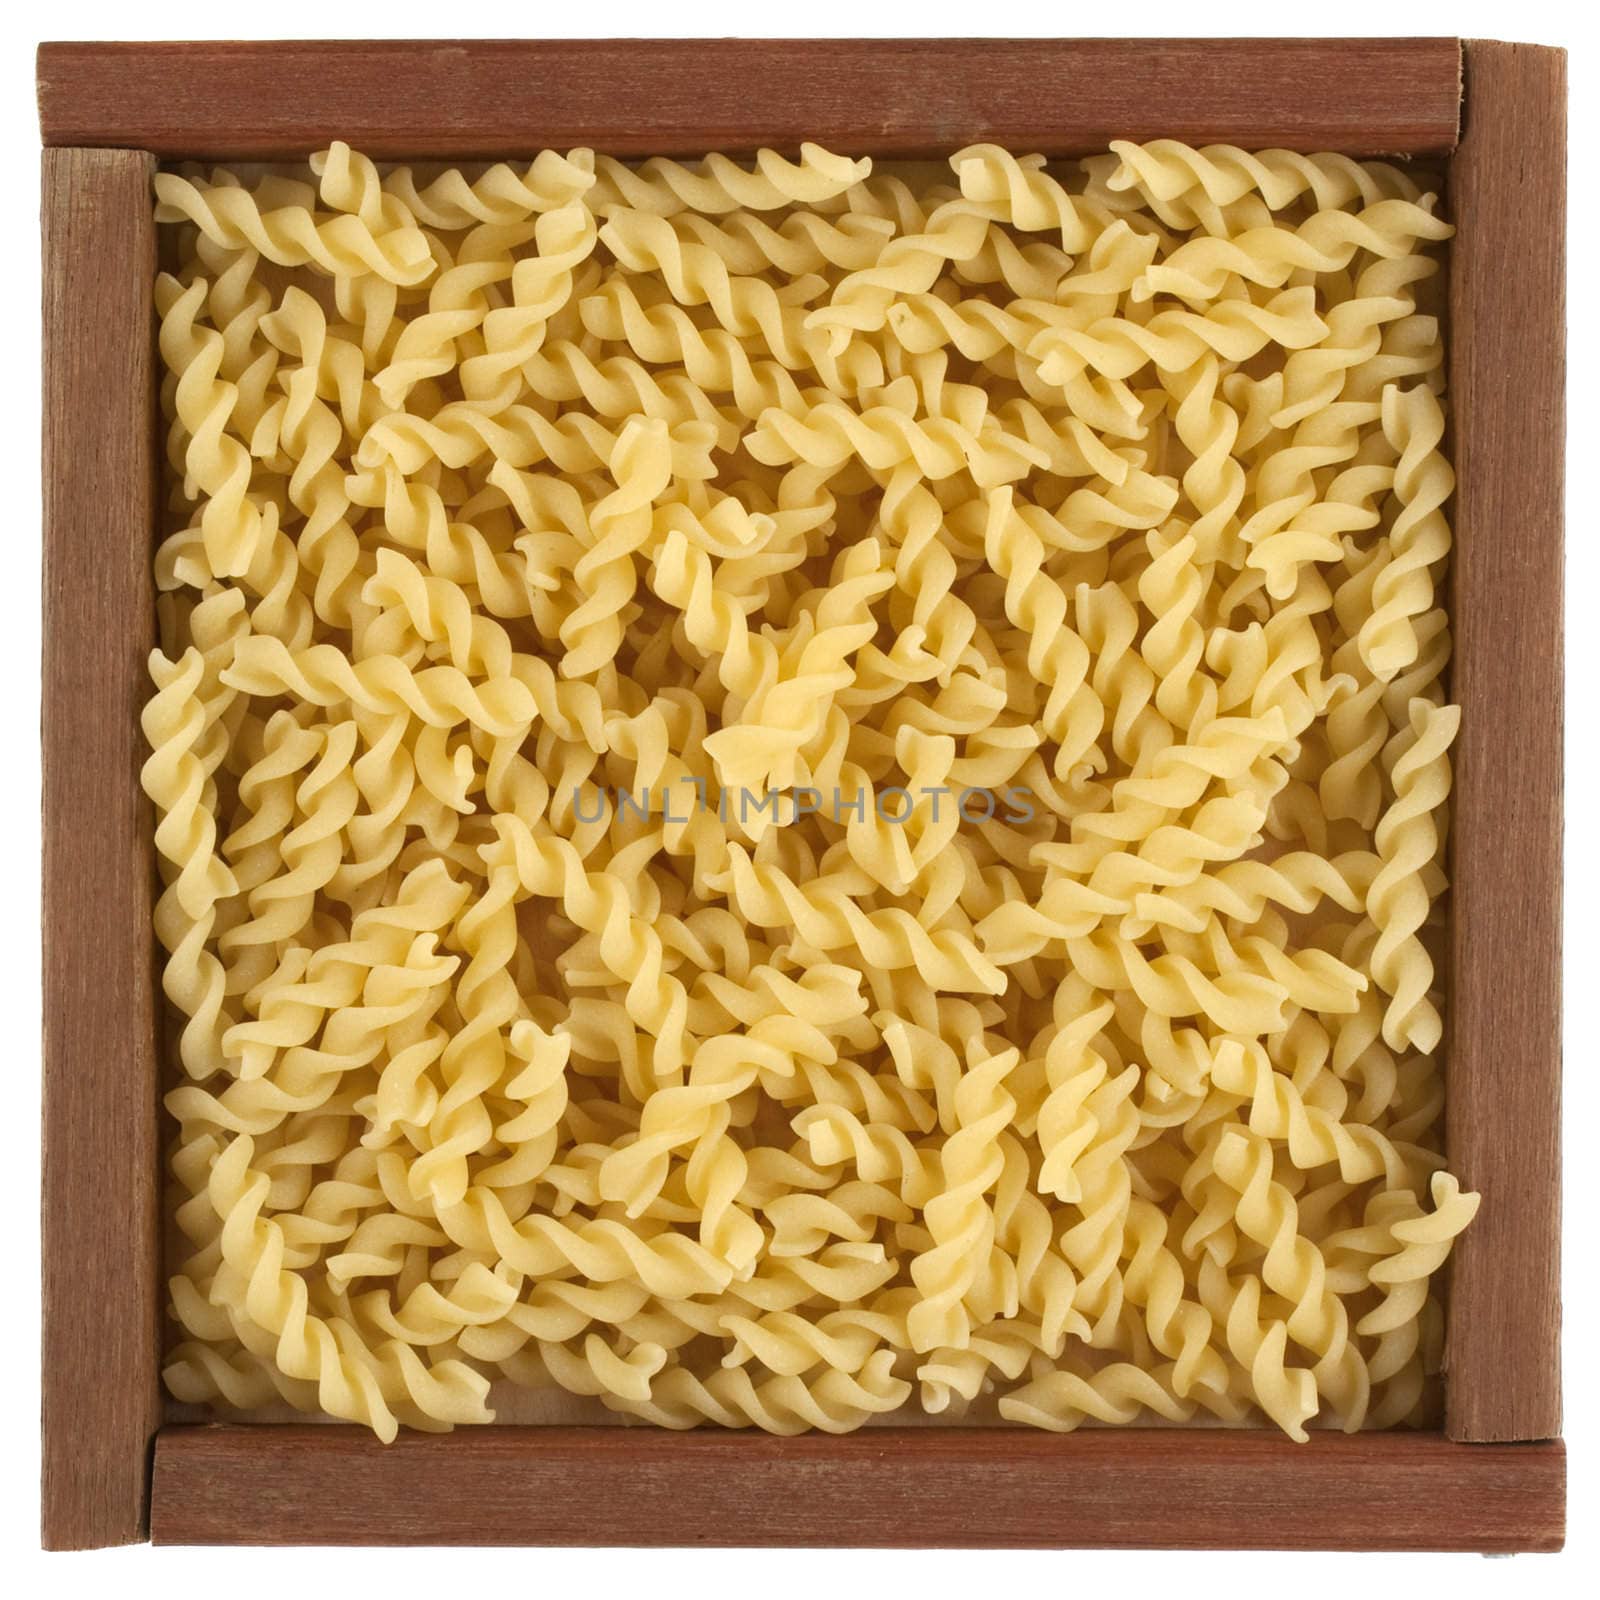 uncooked fusilli pasta in wooden box by PixelsAway